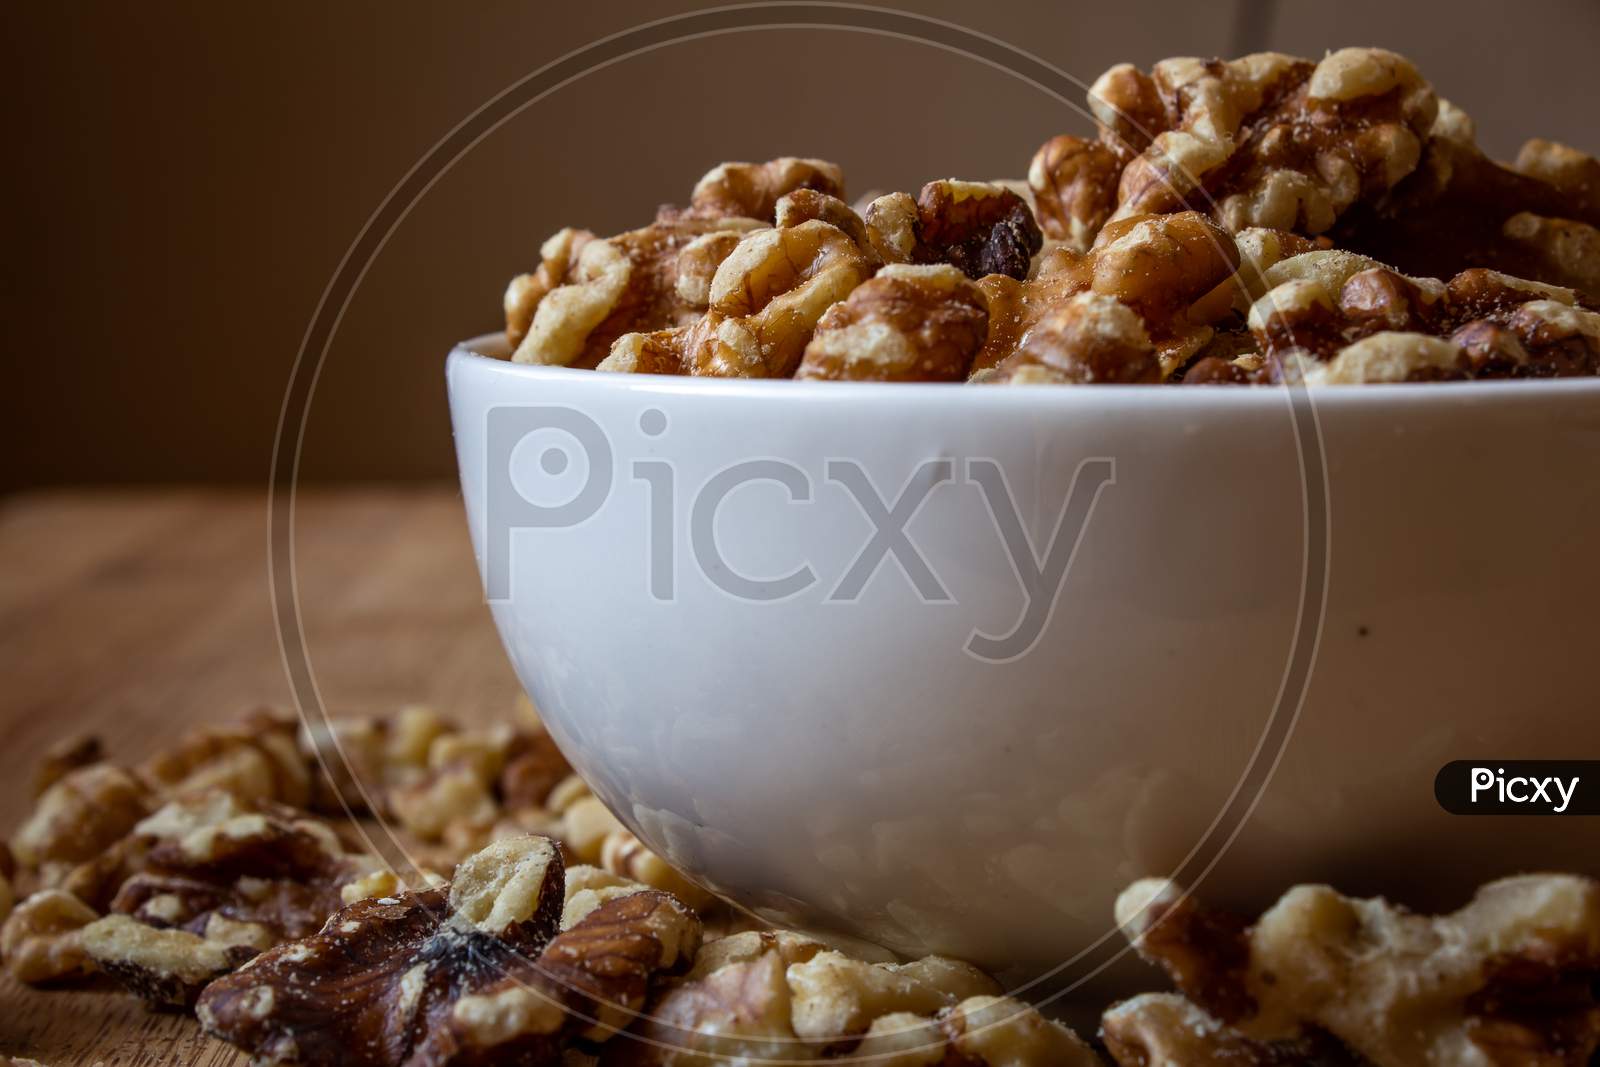 View Of Deshelled Walnuts In A Bowl. Use For Healthy Food Concept